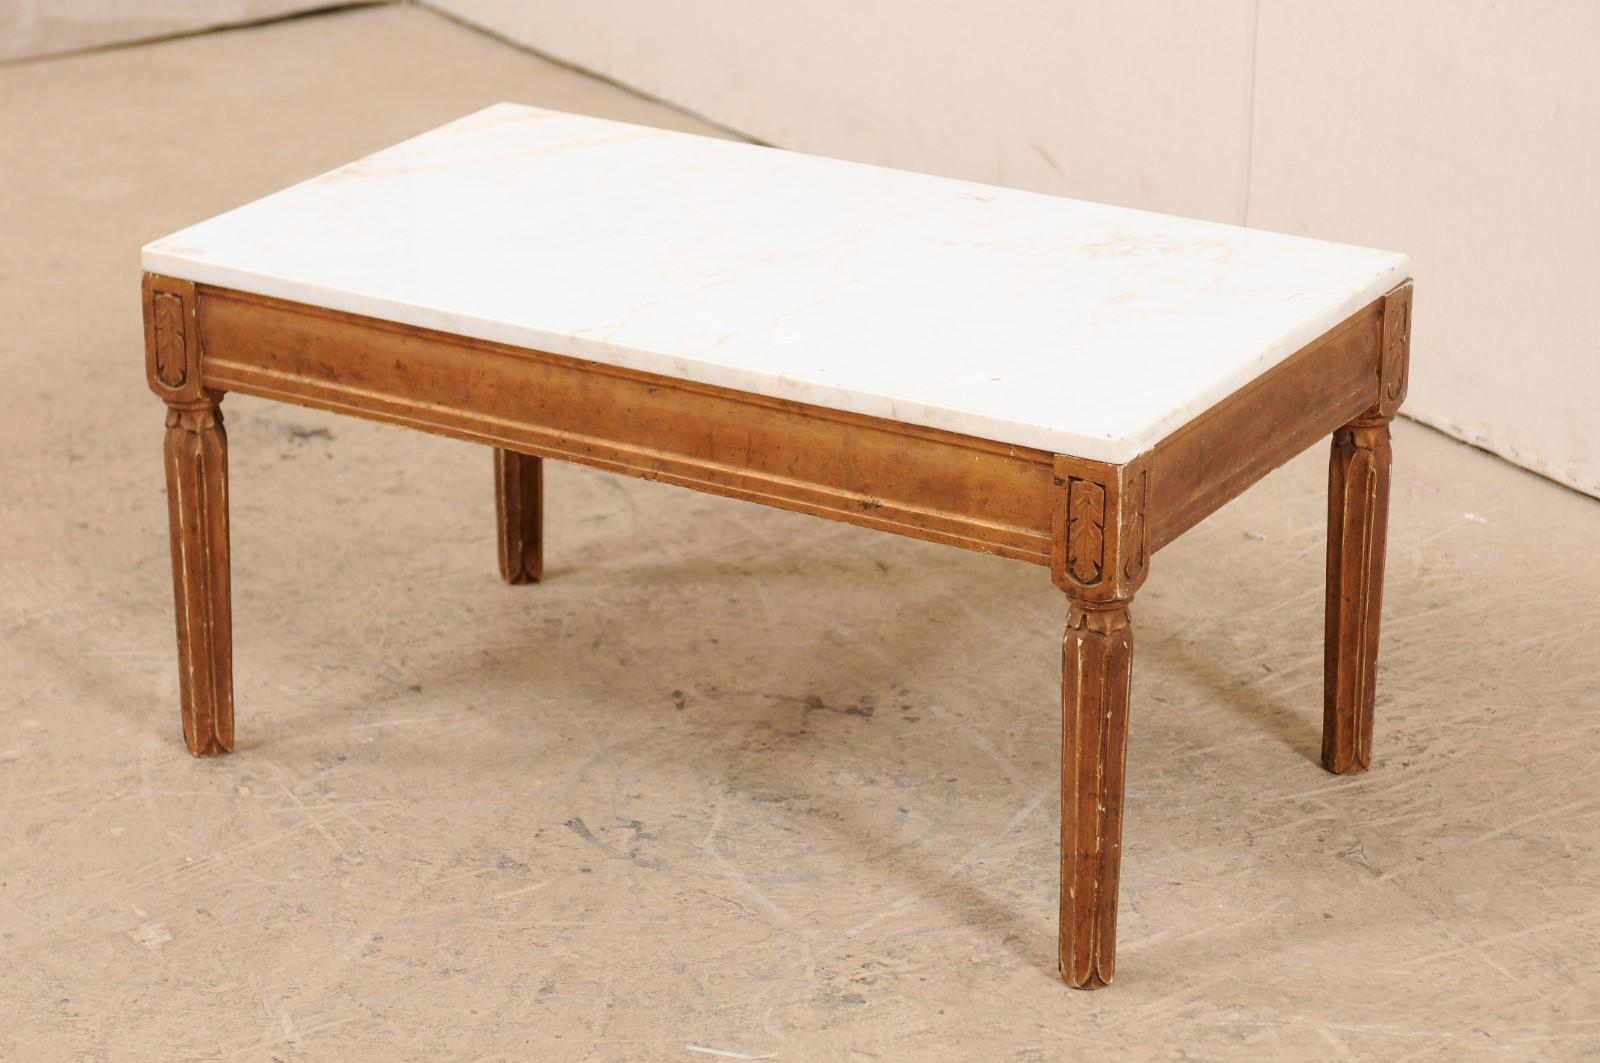 20th Century Antique Swedish Carved Wood Coffee Table with White Marble Top